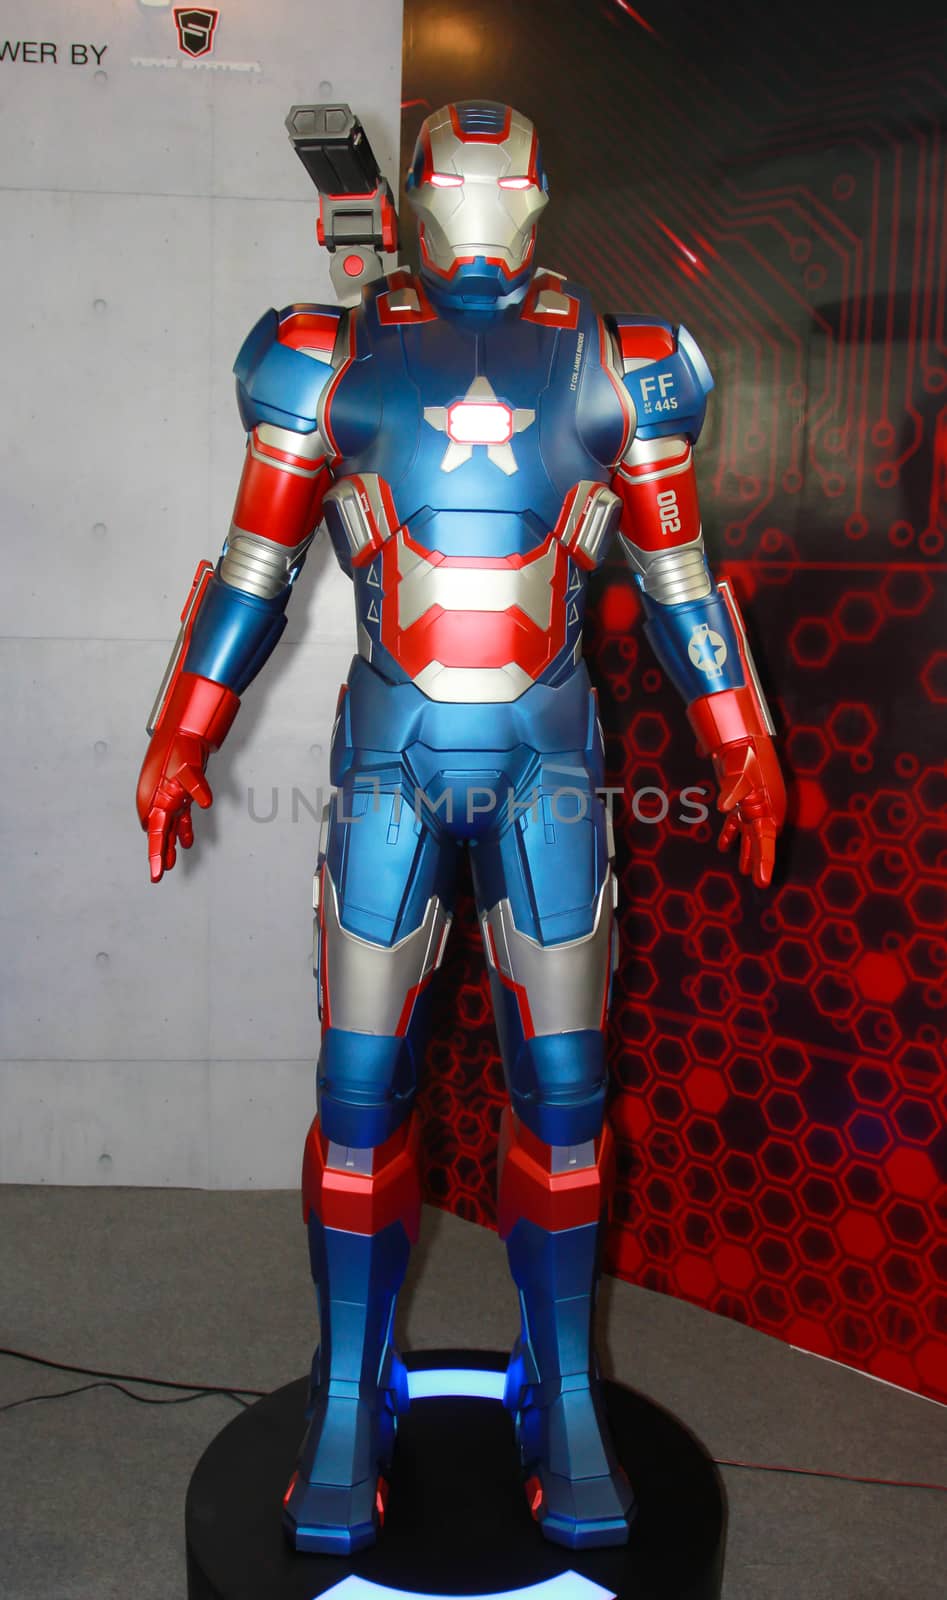 A model of the character Iron Man from the movies and comics 11 by redthirteen